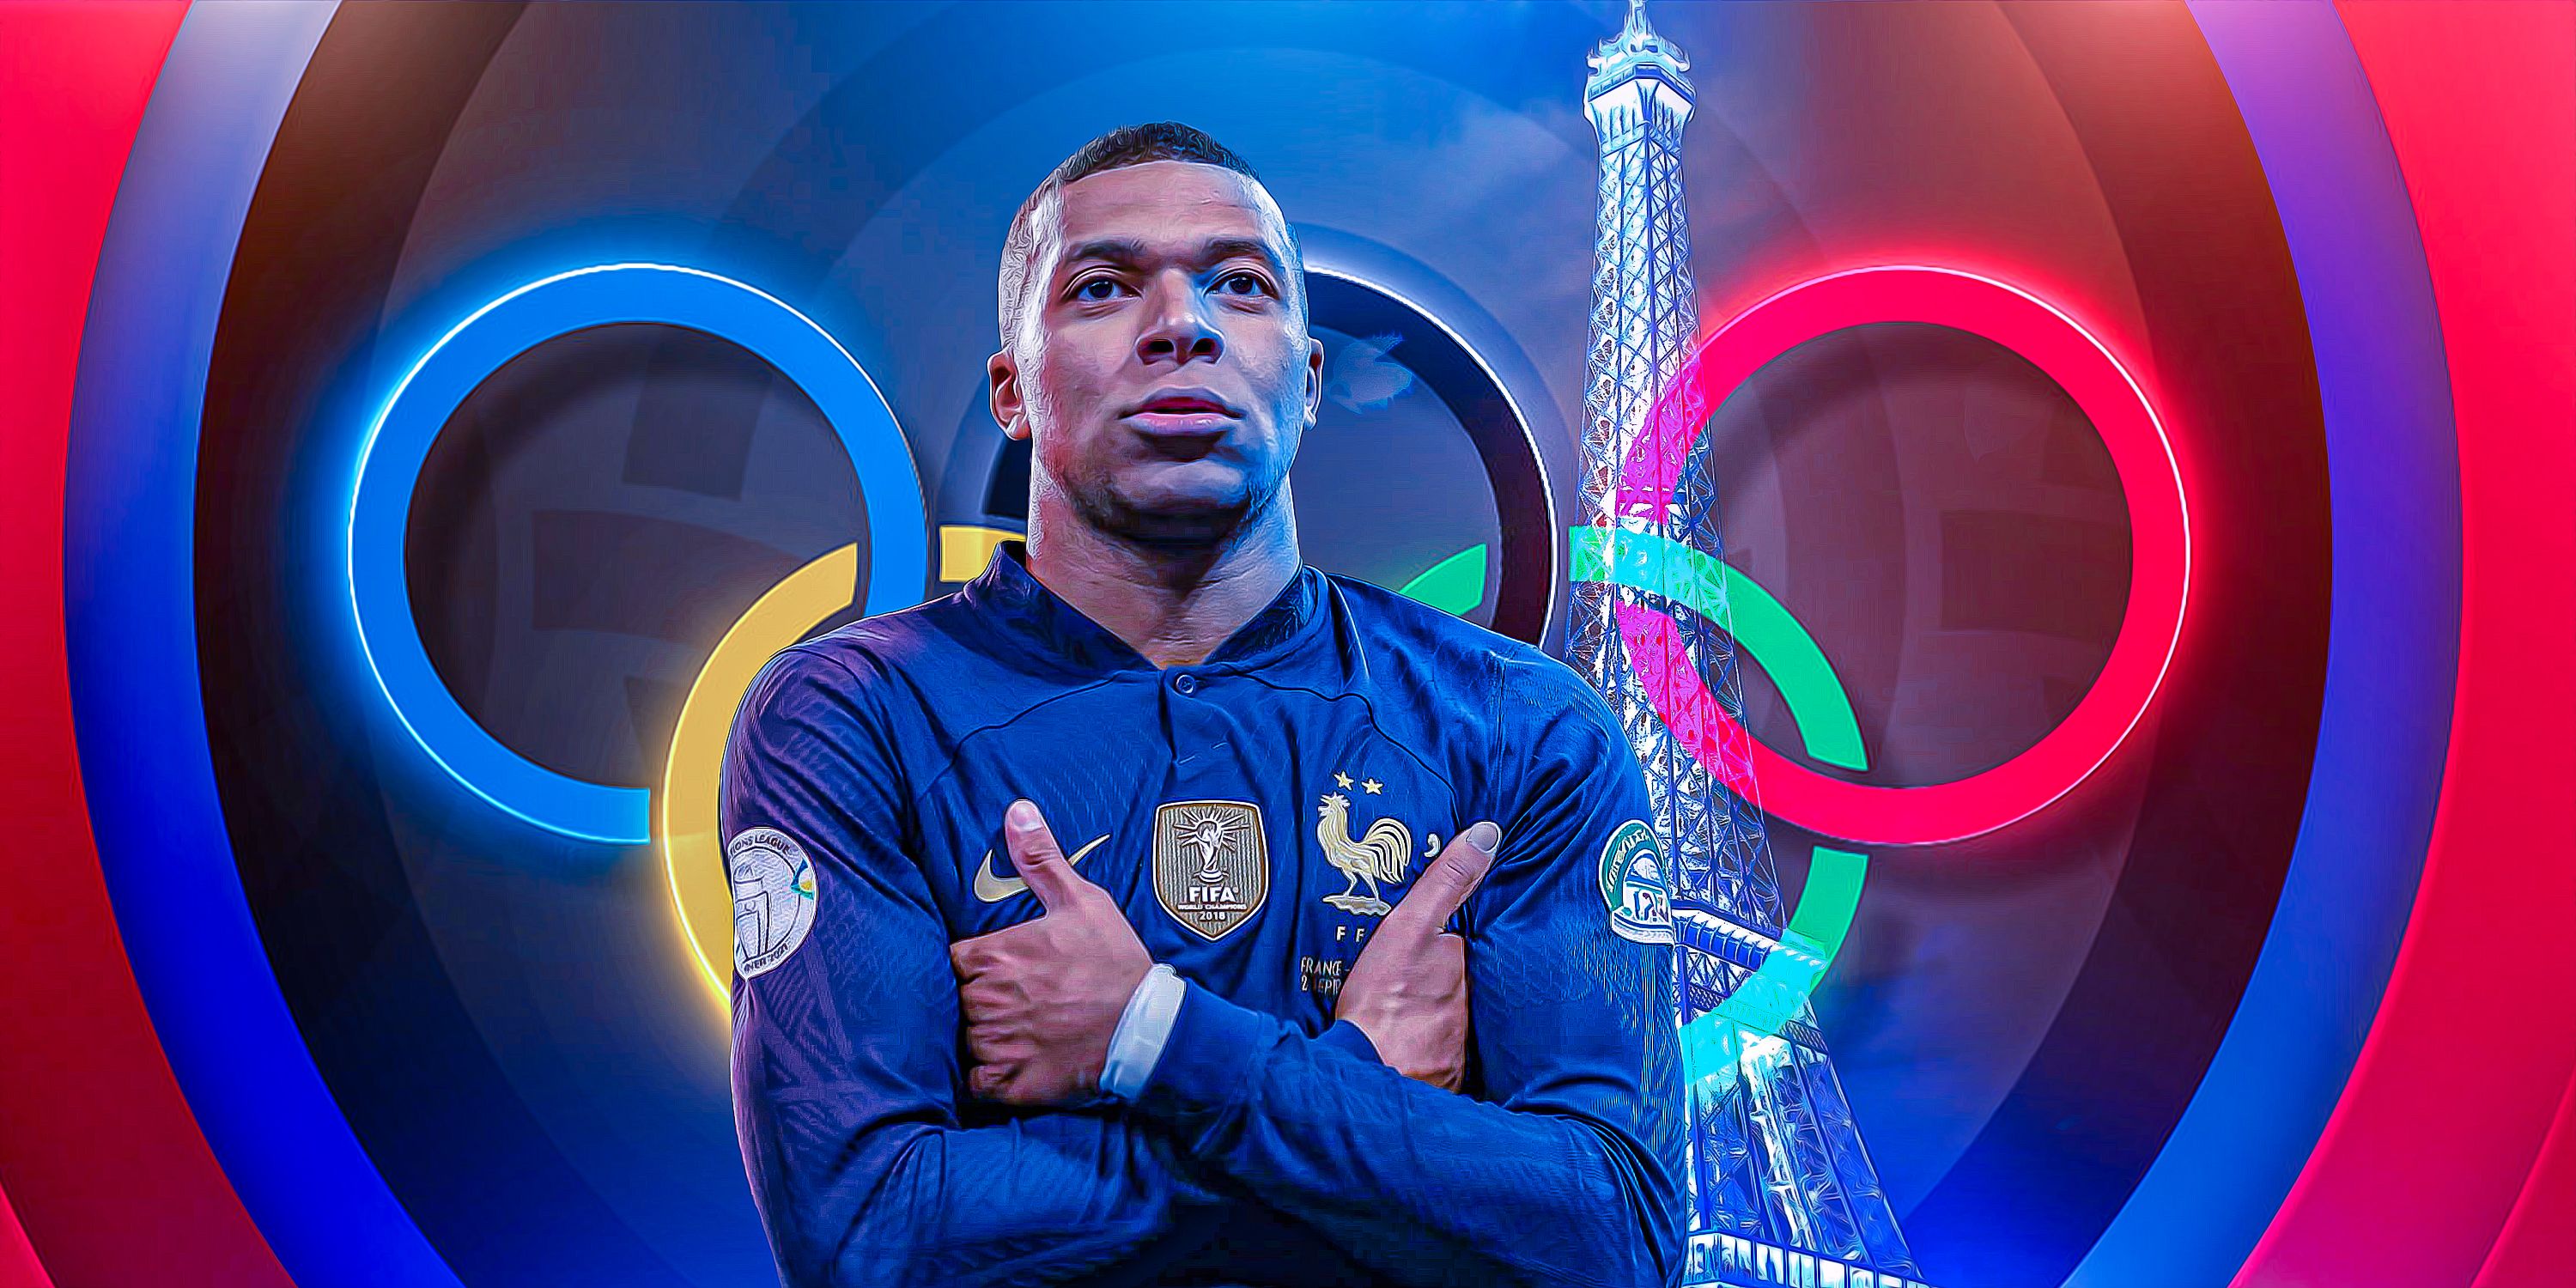 France's Kylian Mbappe standing in front of the Olympic rings and the Eiffel Tower.